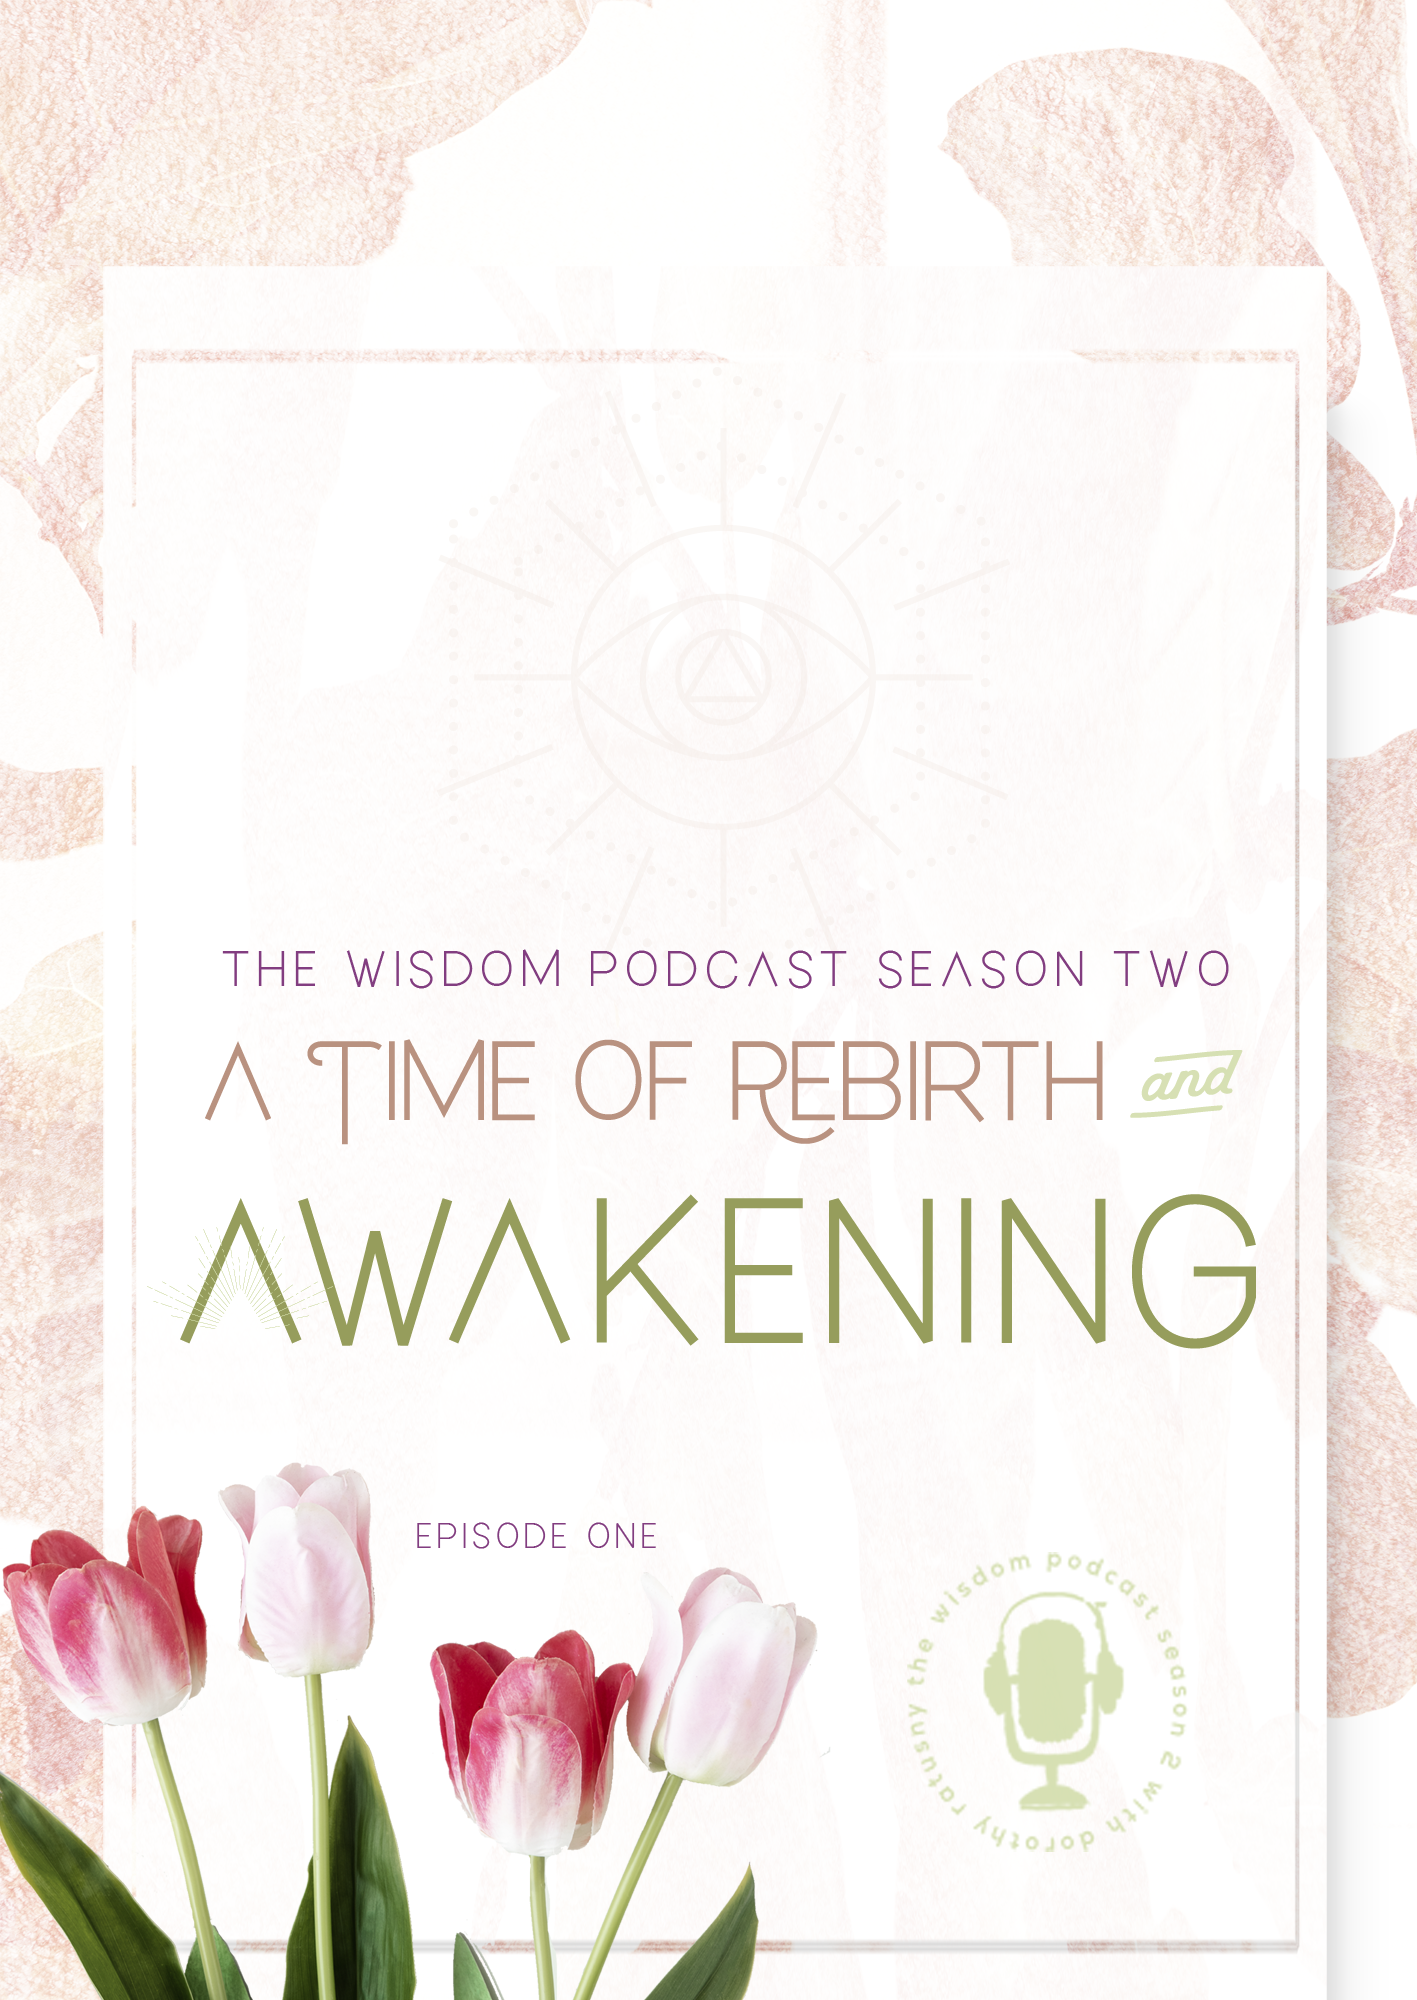 the wisdom podcast s2e1 A Time of Rebirth and Awakening; of Love and Humanity and of the Earth.